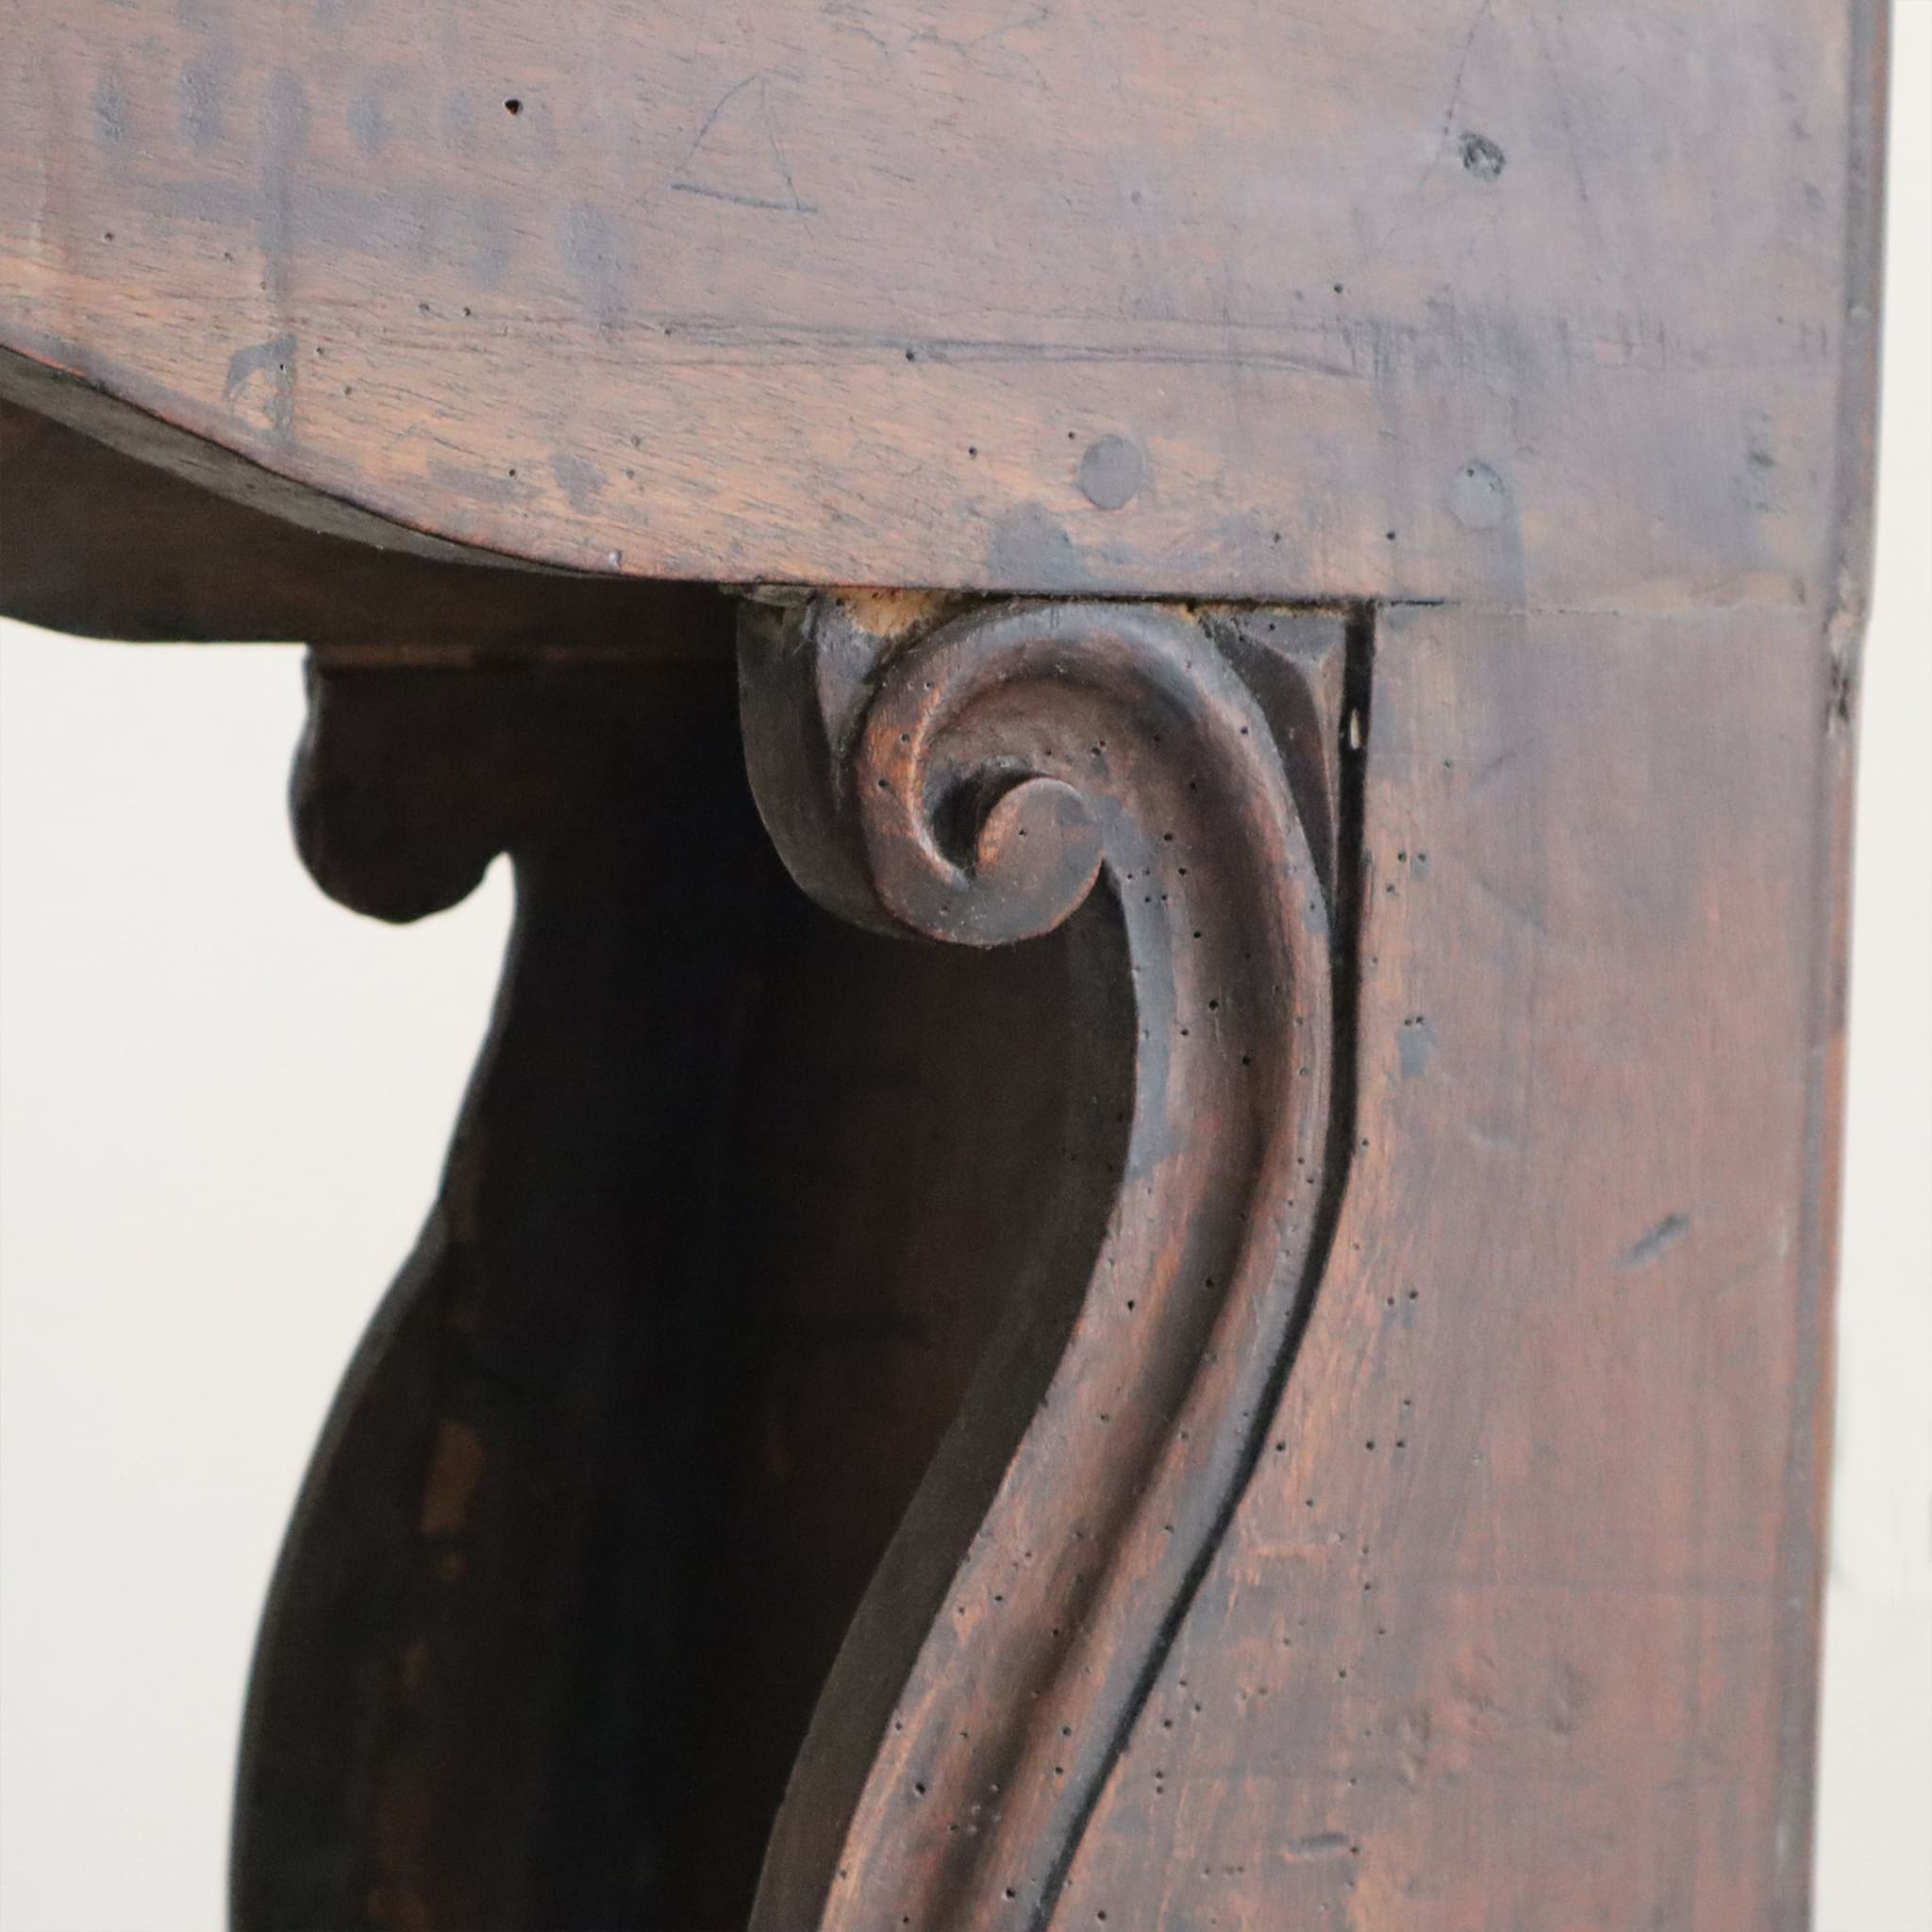 visionidepoca-antique-kneeler-in-solid-walnut-from-18th-century-belonged-to-prince-ambrogio-II-caracciolo-detail-view-antique-woodworking